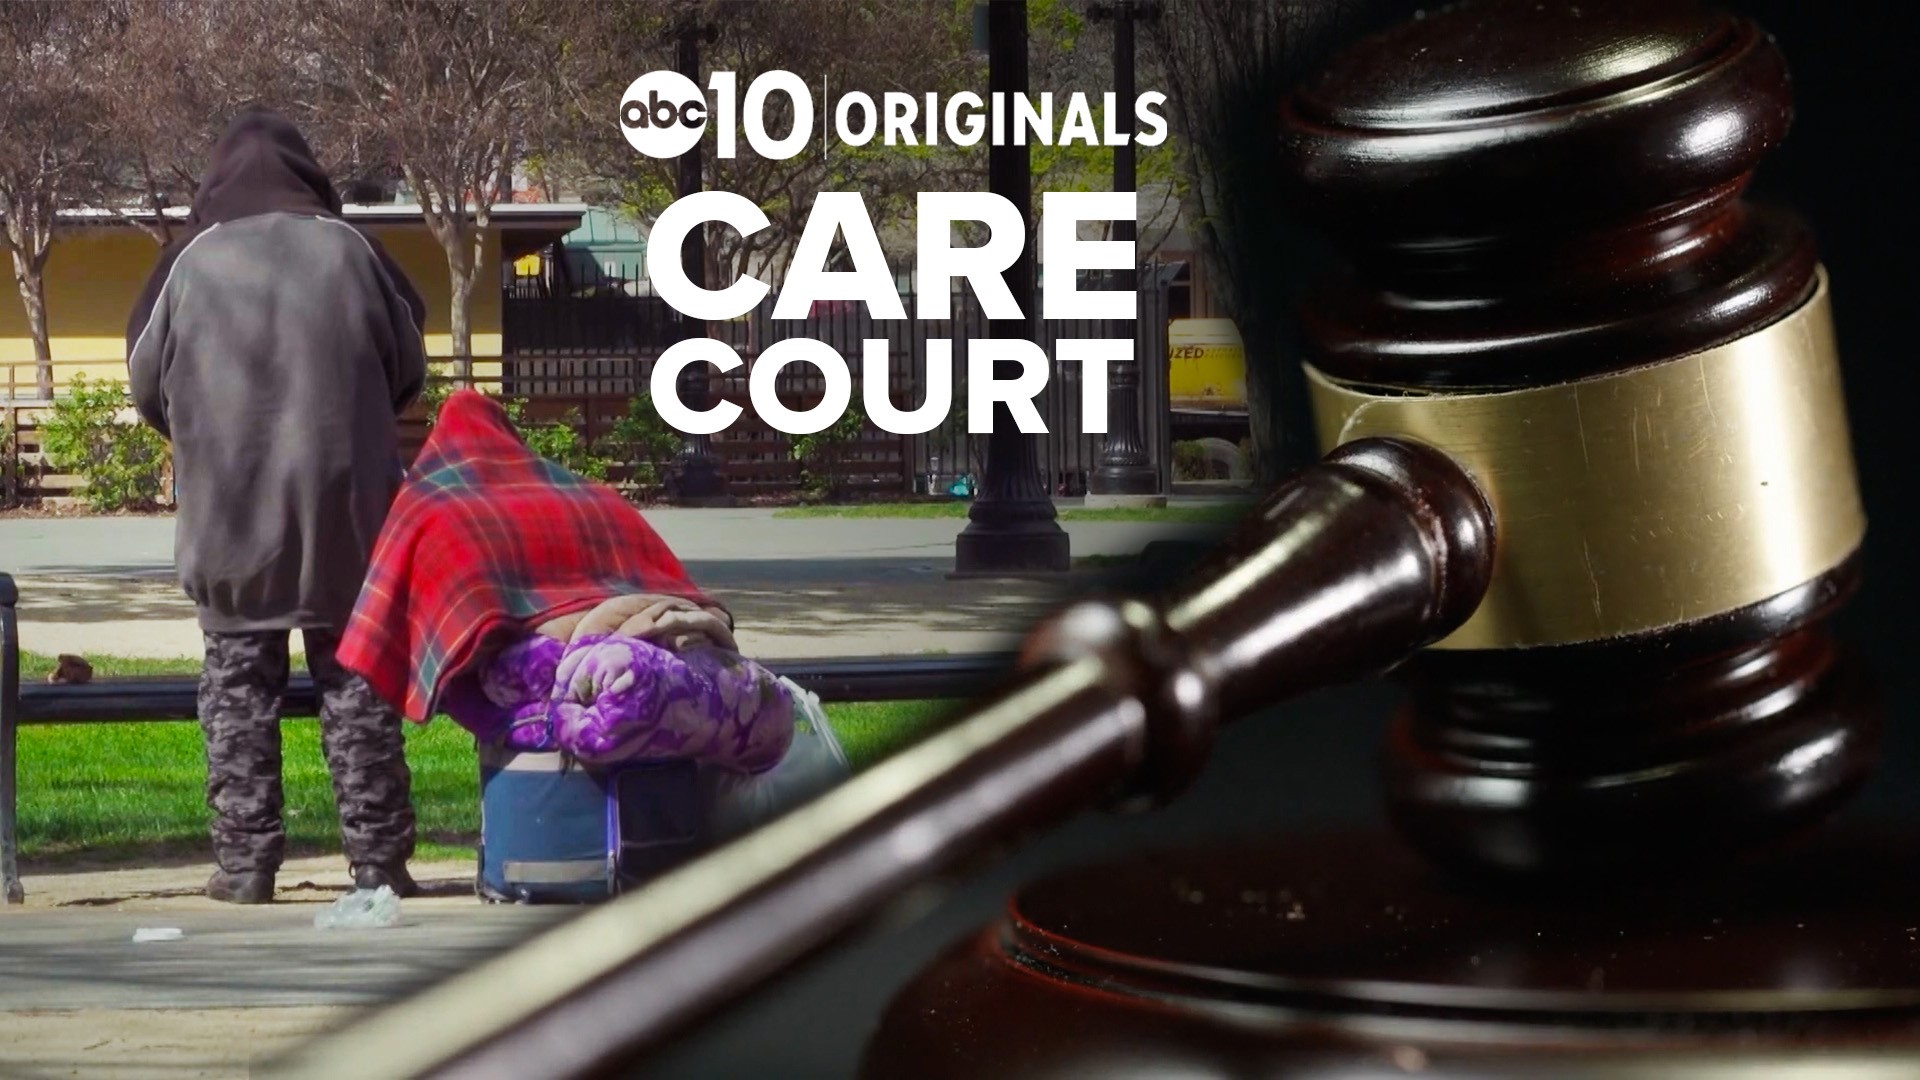 Stanislaus County is among those required to put a CARE COURT plan in place that would mandate people suffering severe mental illness to receive treatment.